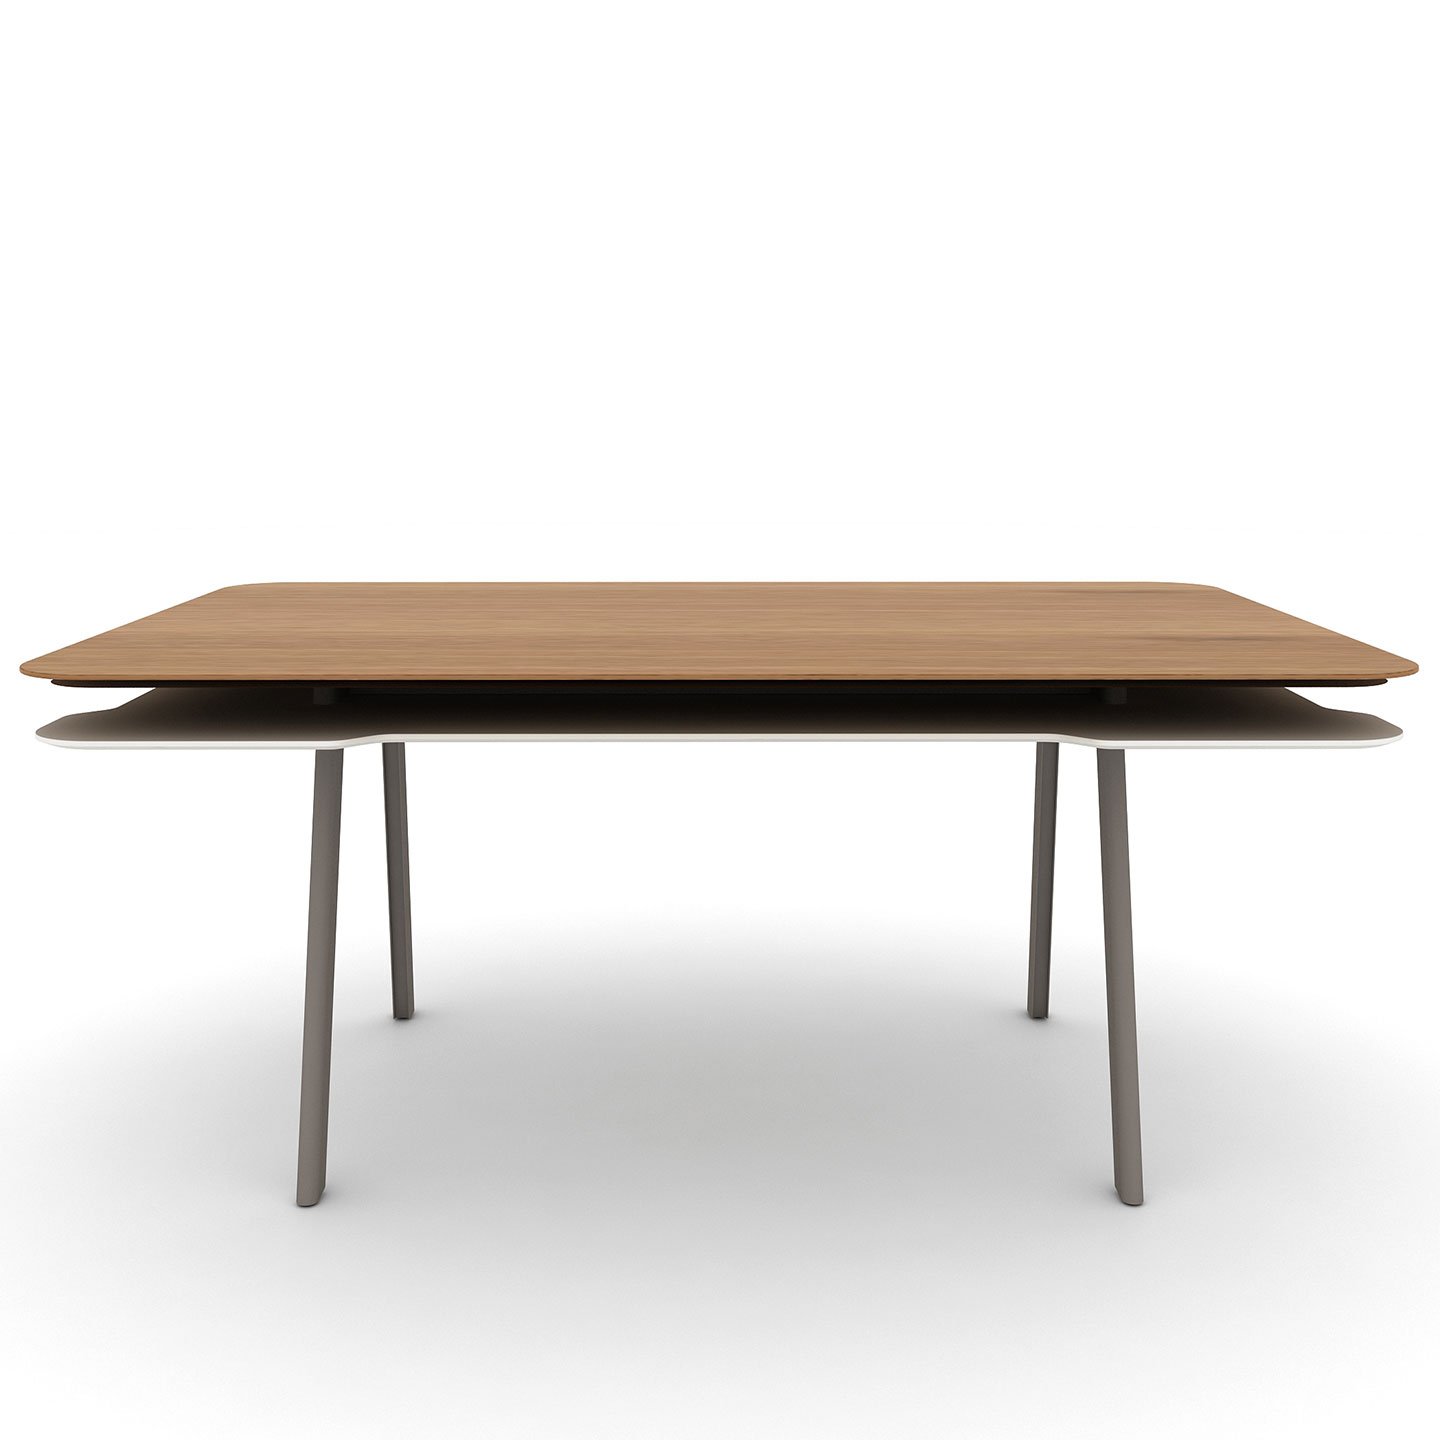 Haworth Immerse table with 4 legs and rectangular top 